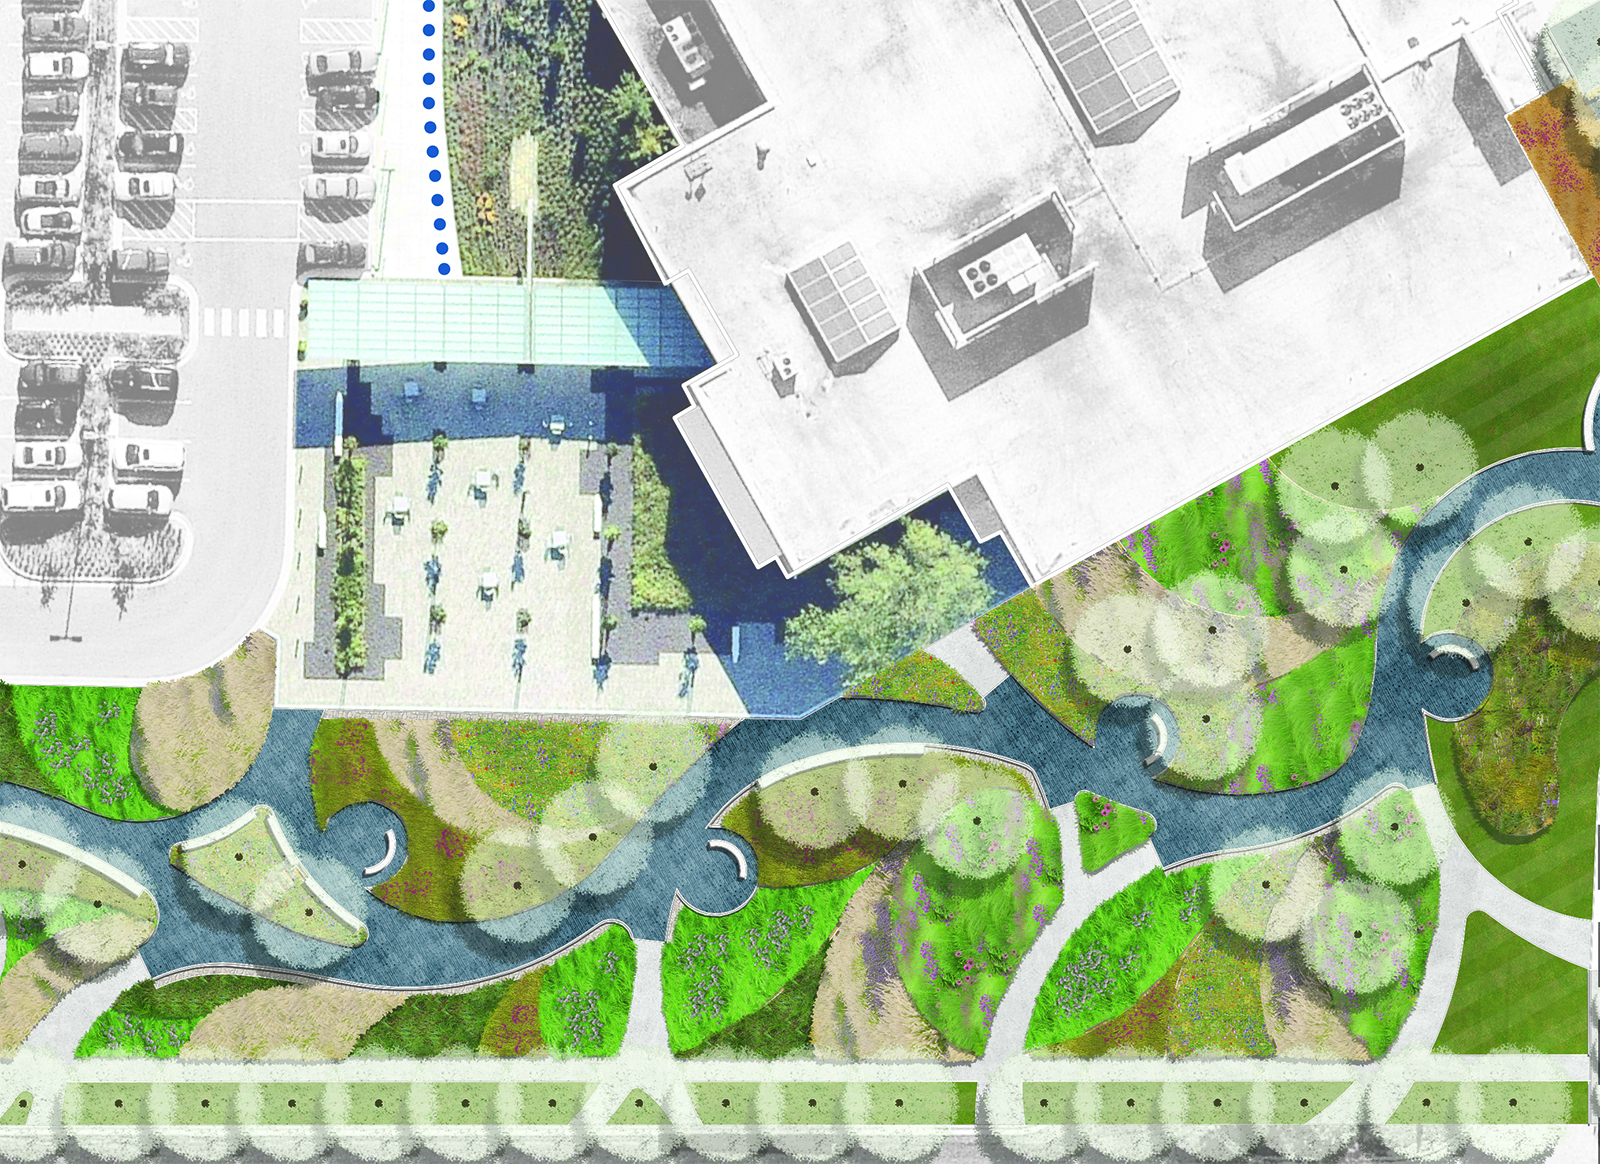 Swope Campus Stormwater Concept